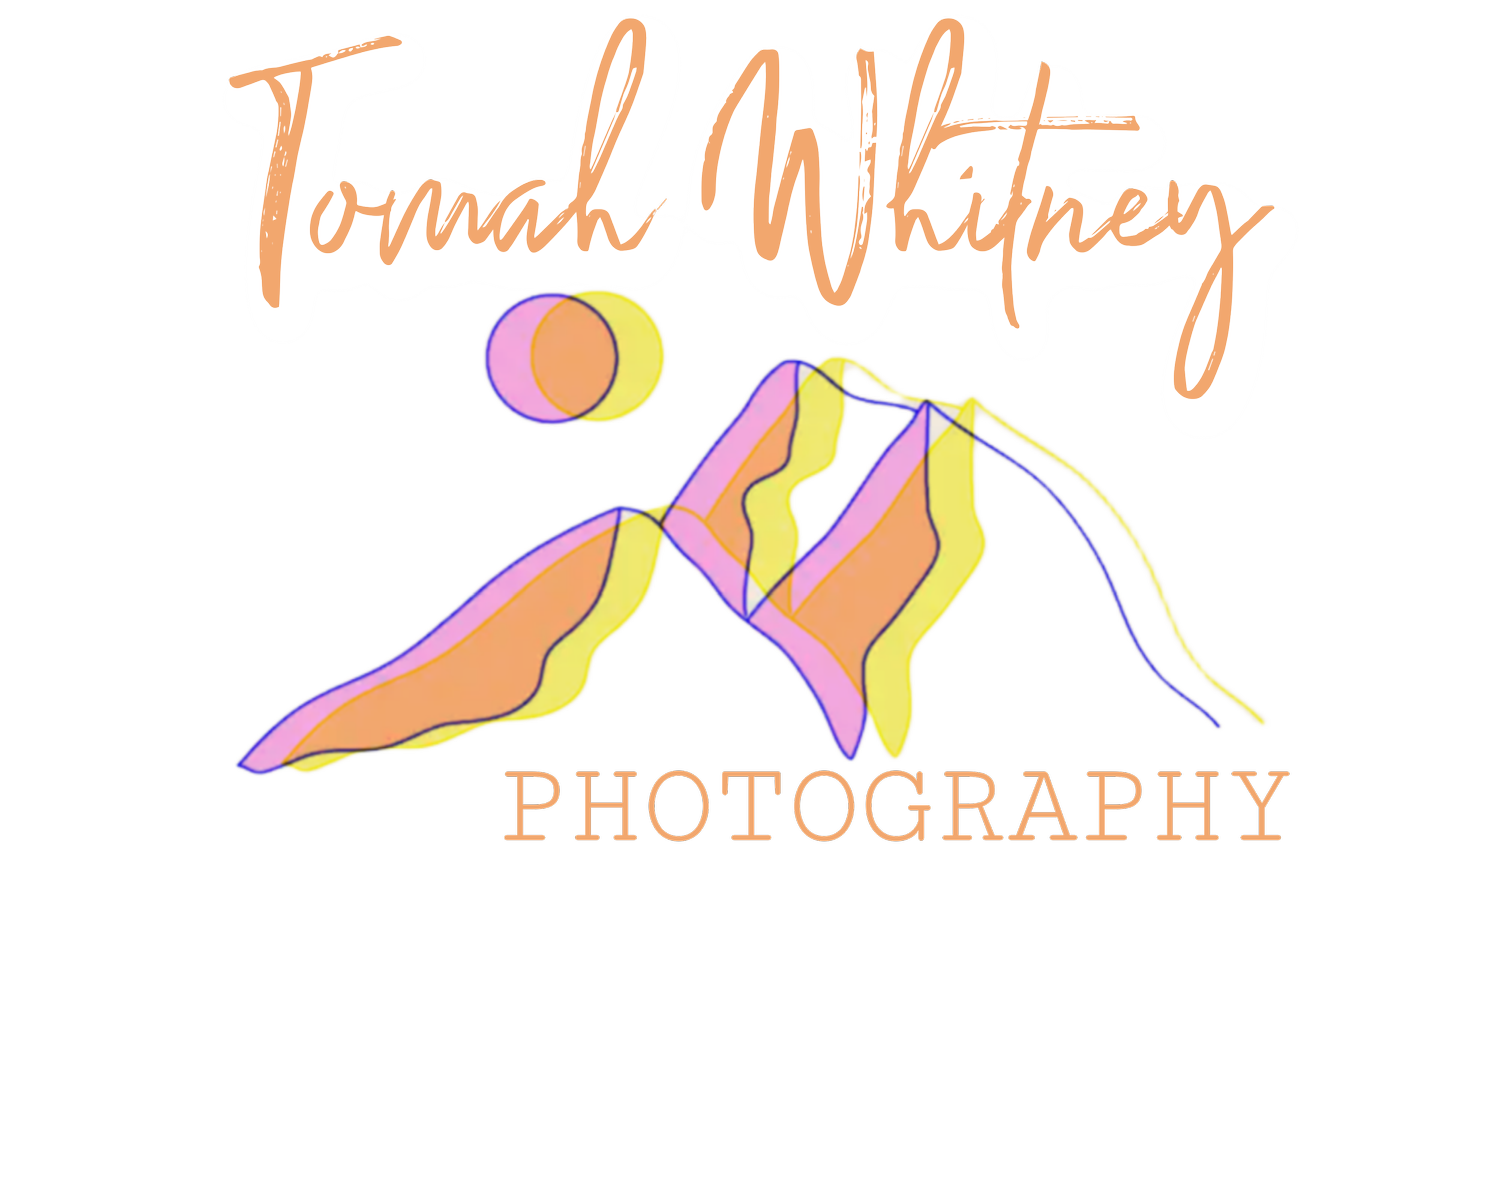 Tomah Whitney Photography